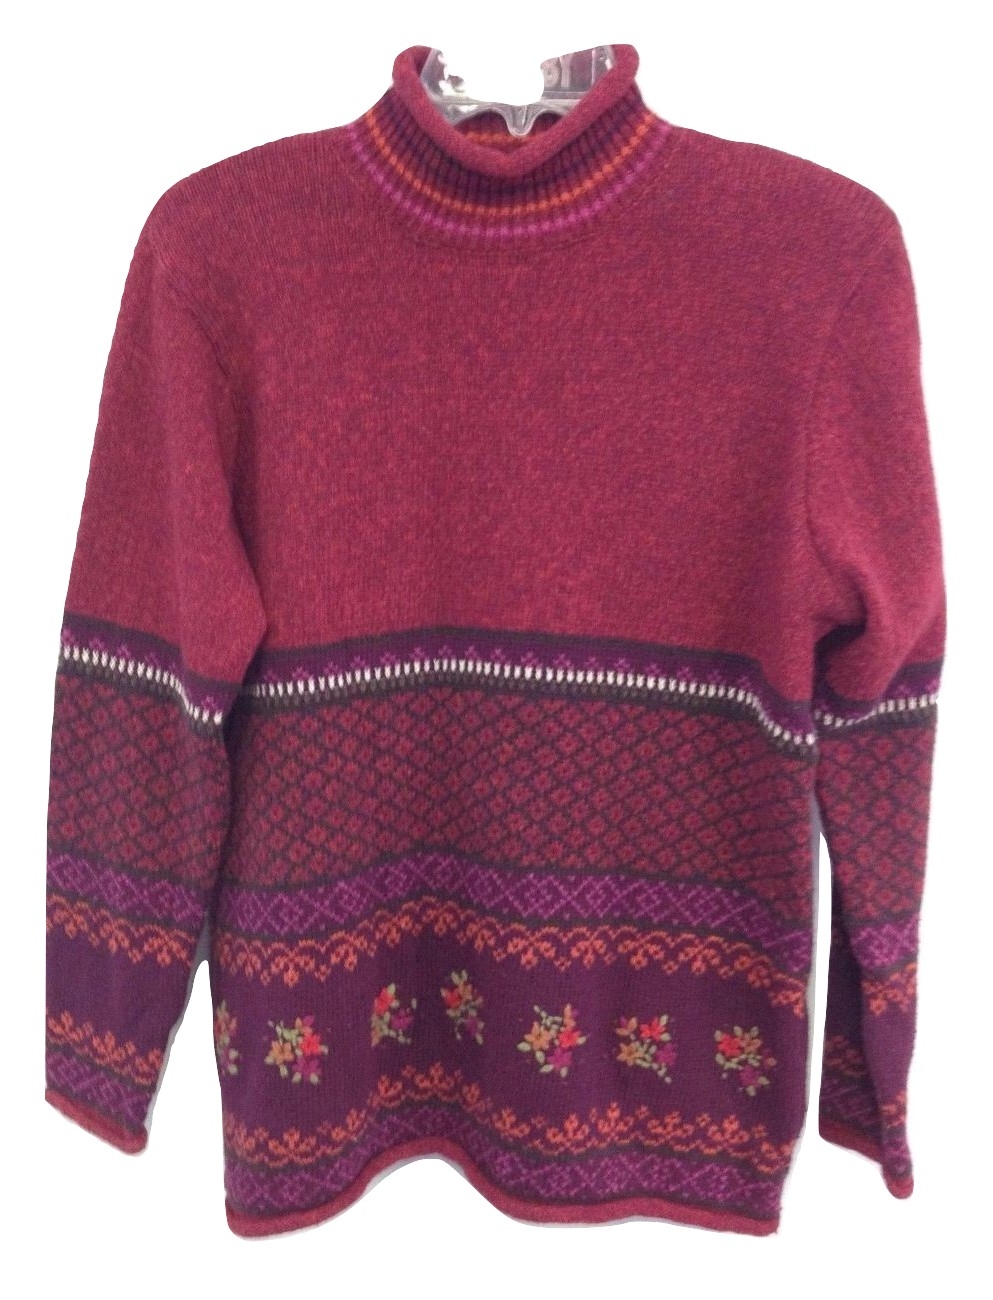 Size L Studio Works Embroidered Sweater in Red